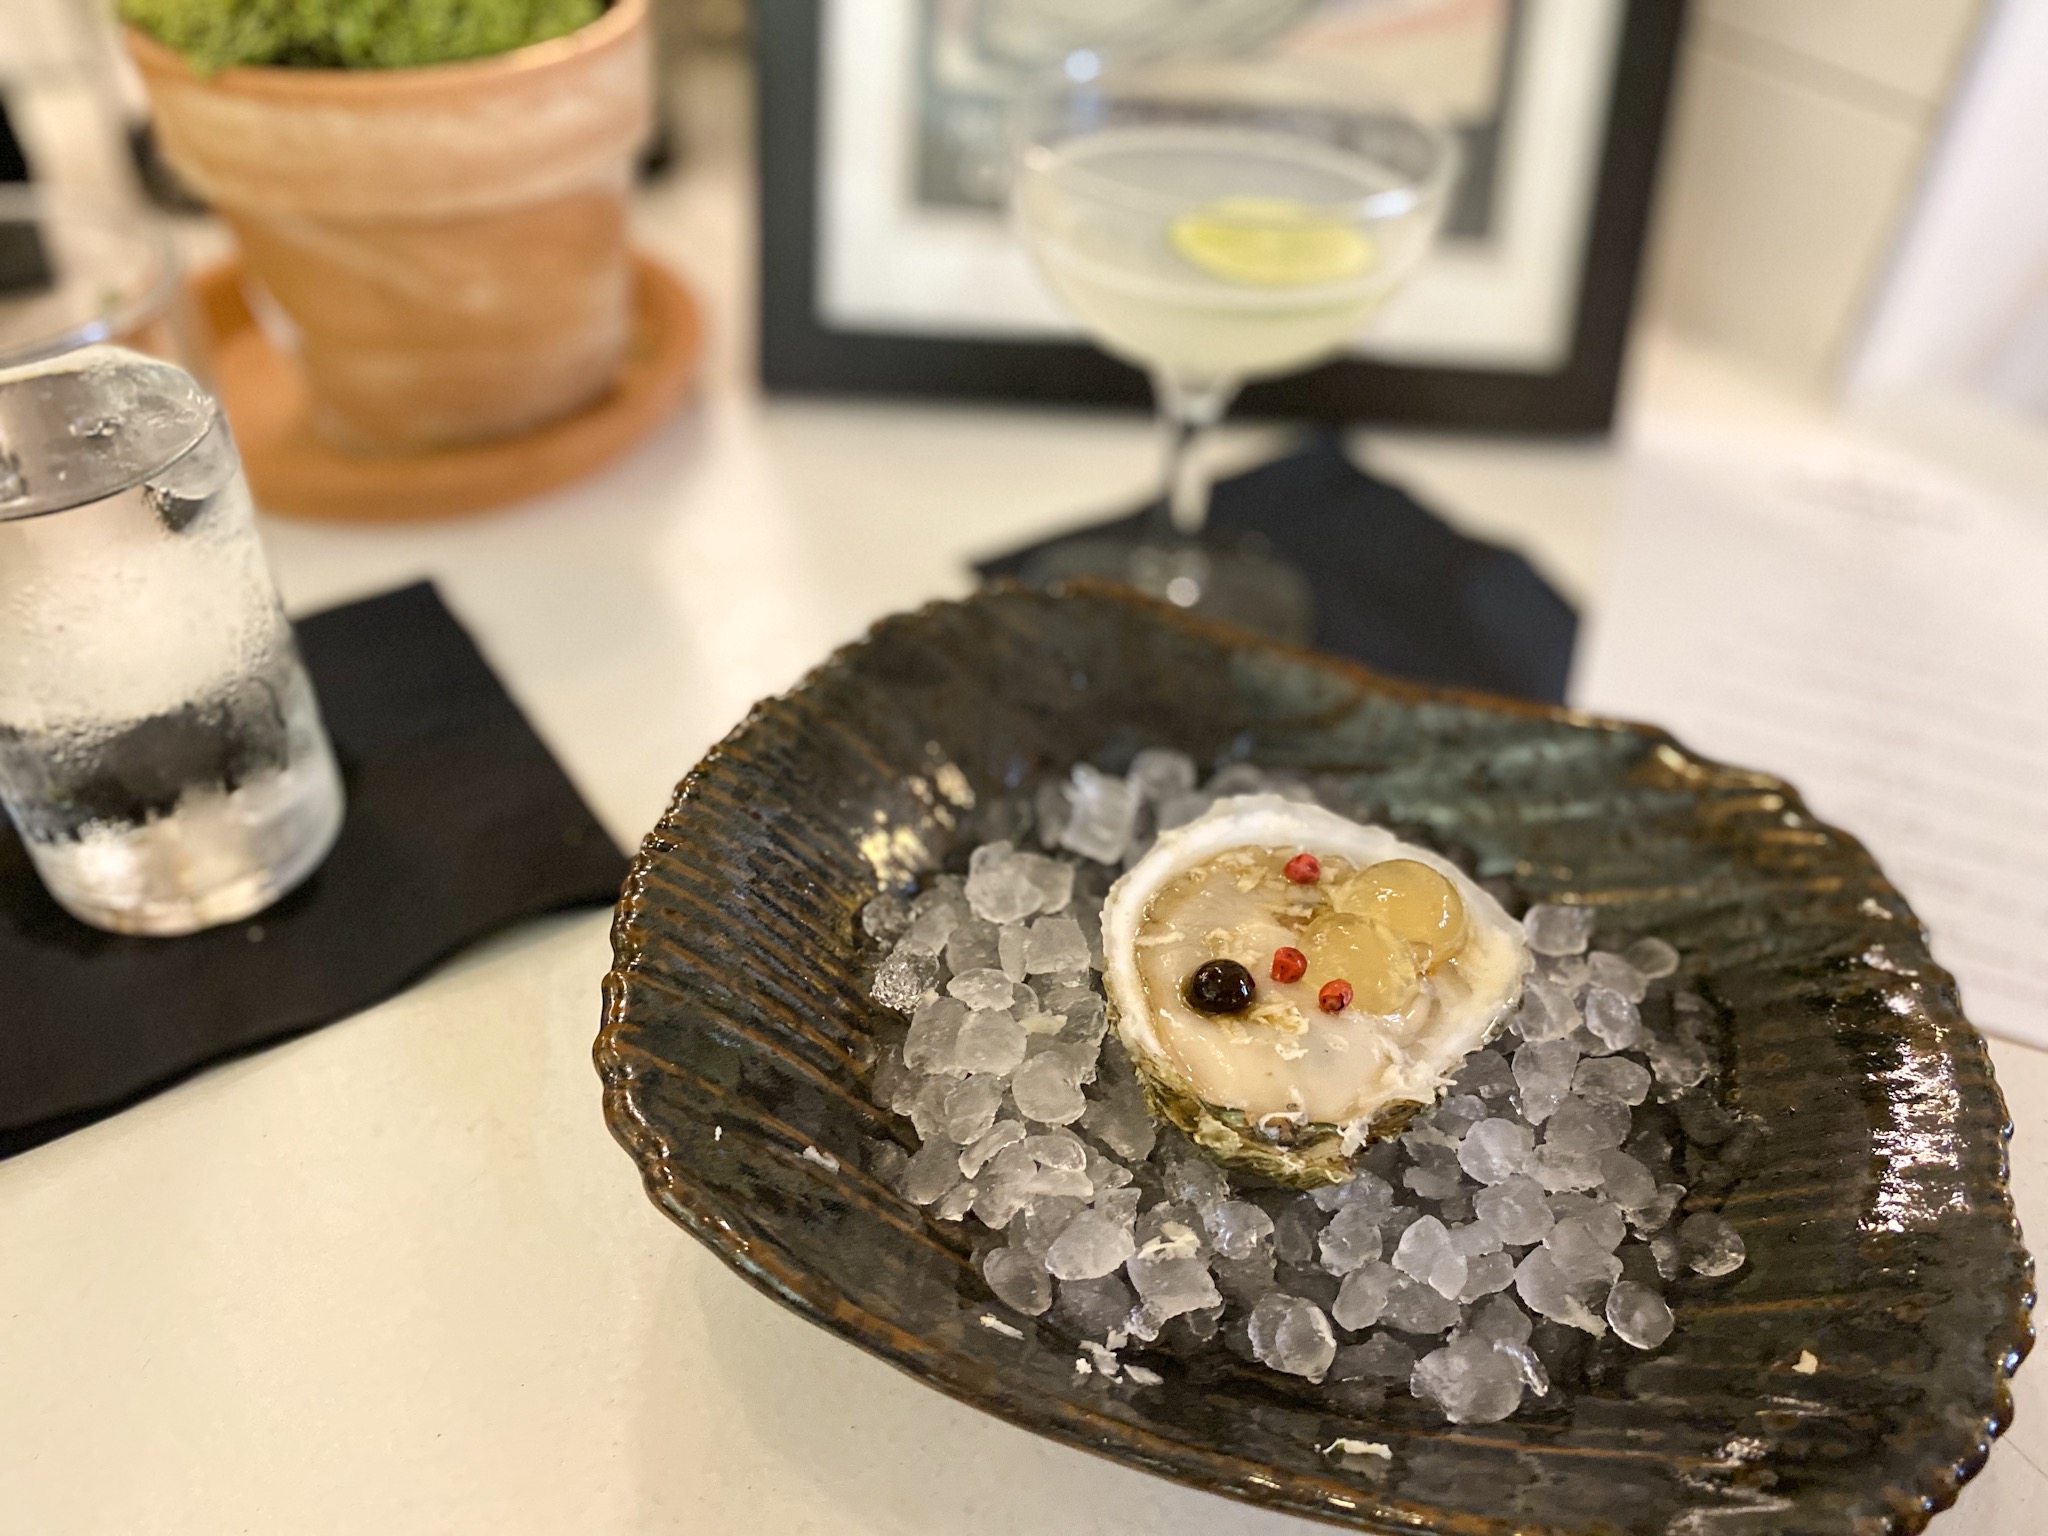 Omakase Oyster experience at Modern Brine